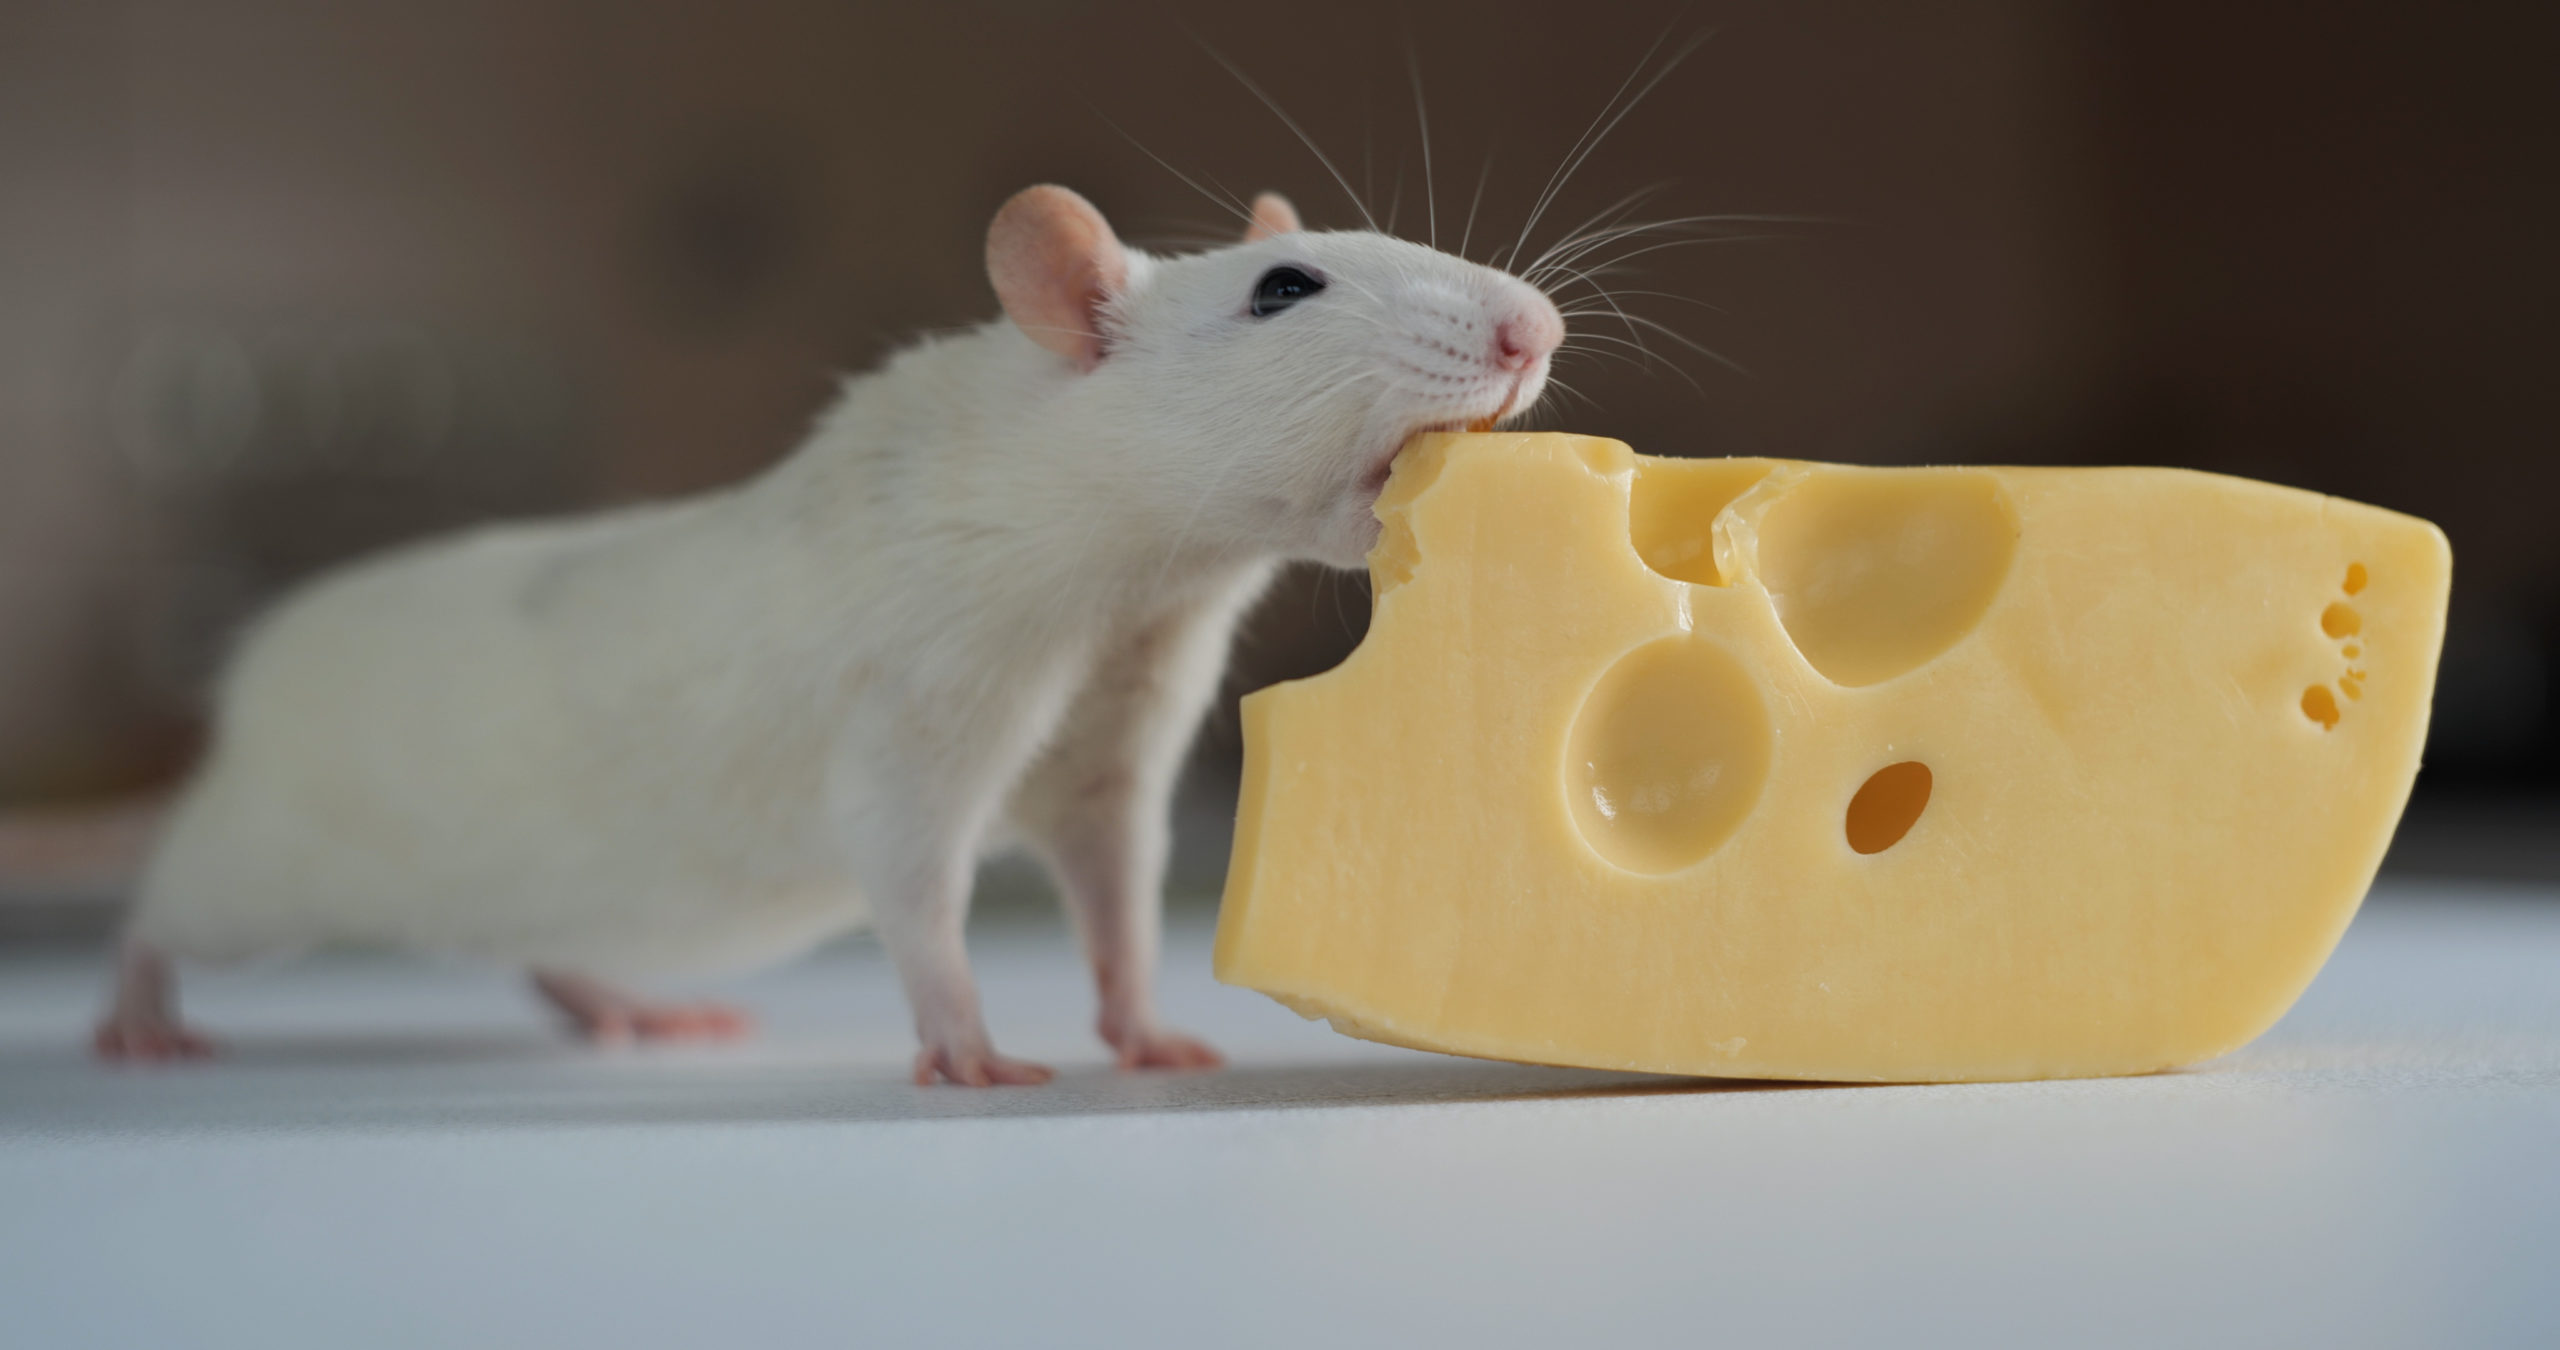 A rat is shown eating cheese.